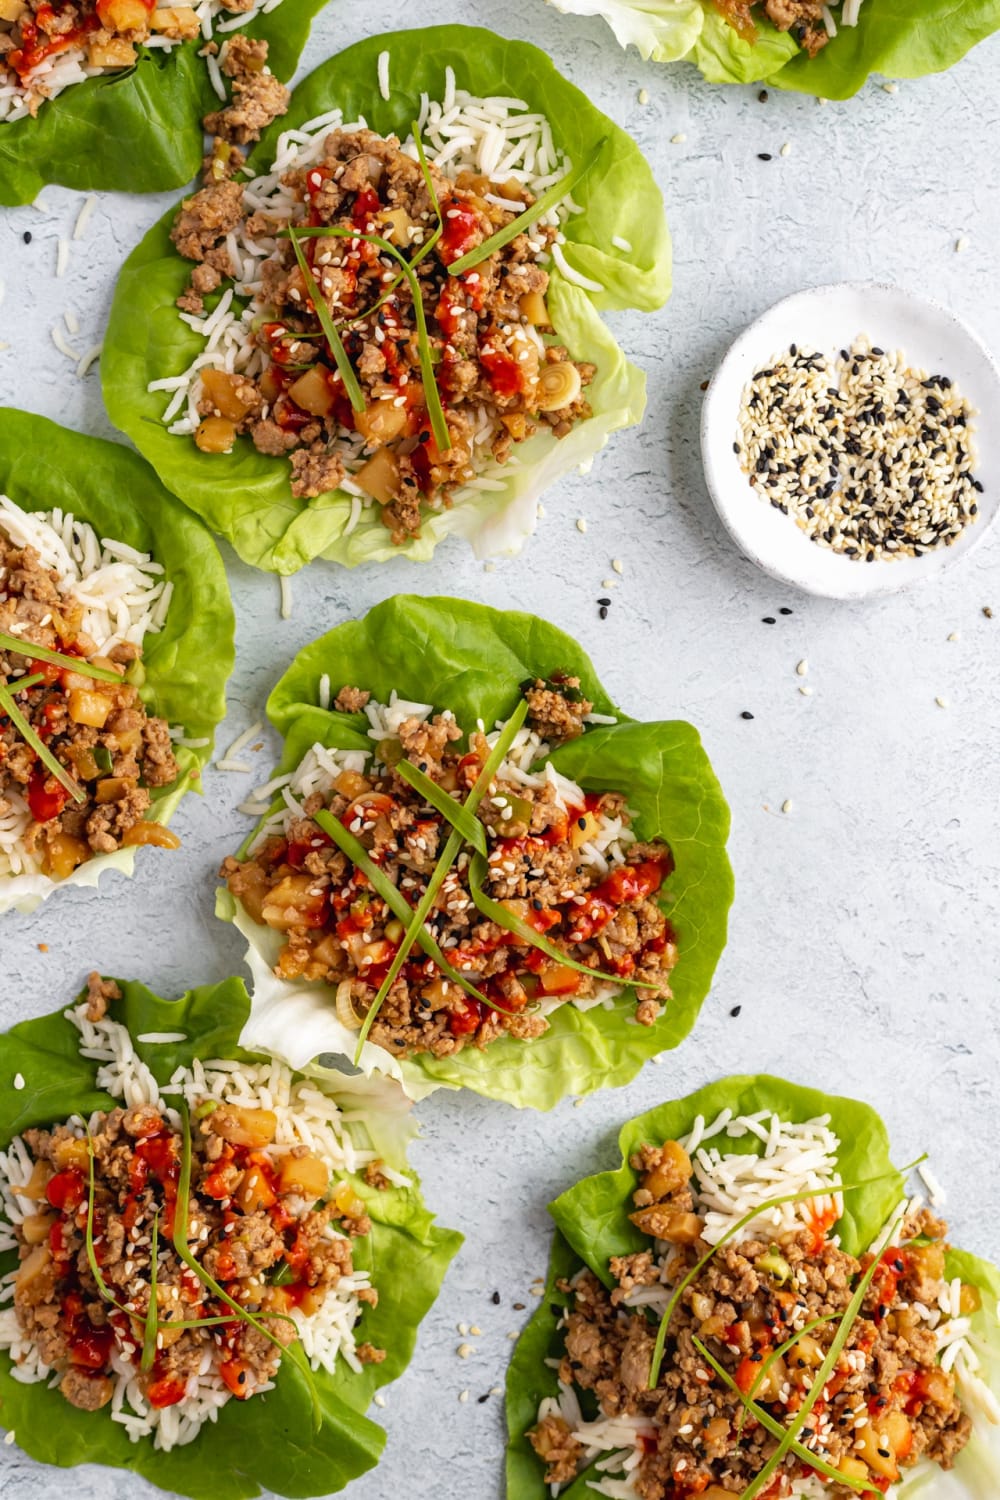 I cannot get enough of these flavorful Asian Chicken Lettuce Wraps!